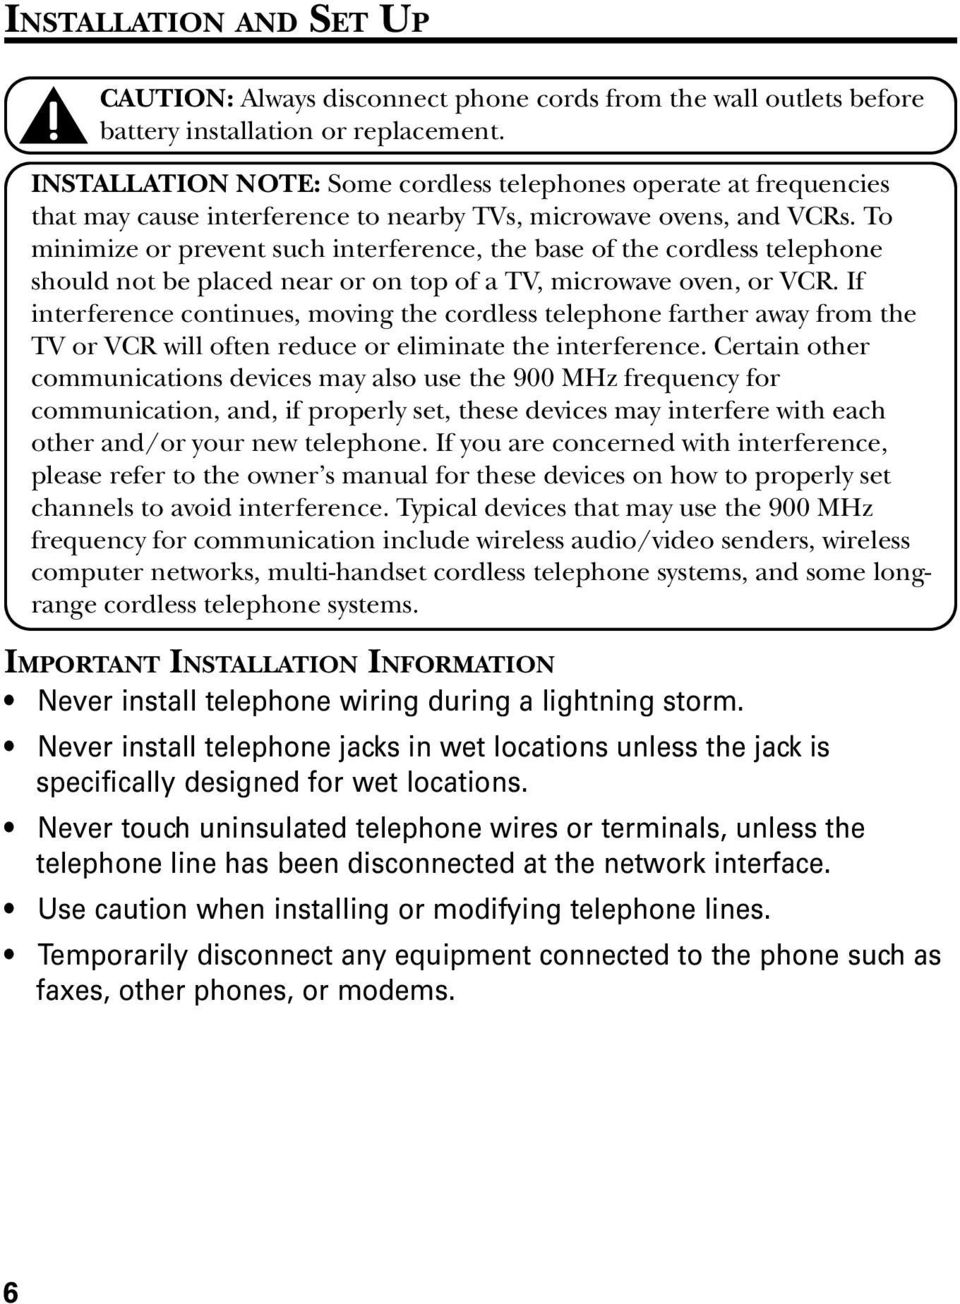 To minimize or prevent such interference, the base of the cordless telephone should not be placed near or on top of a TV, microwave oven, or VCR.